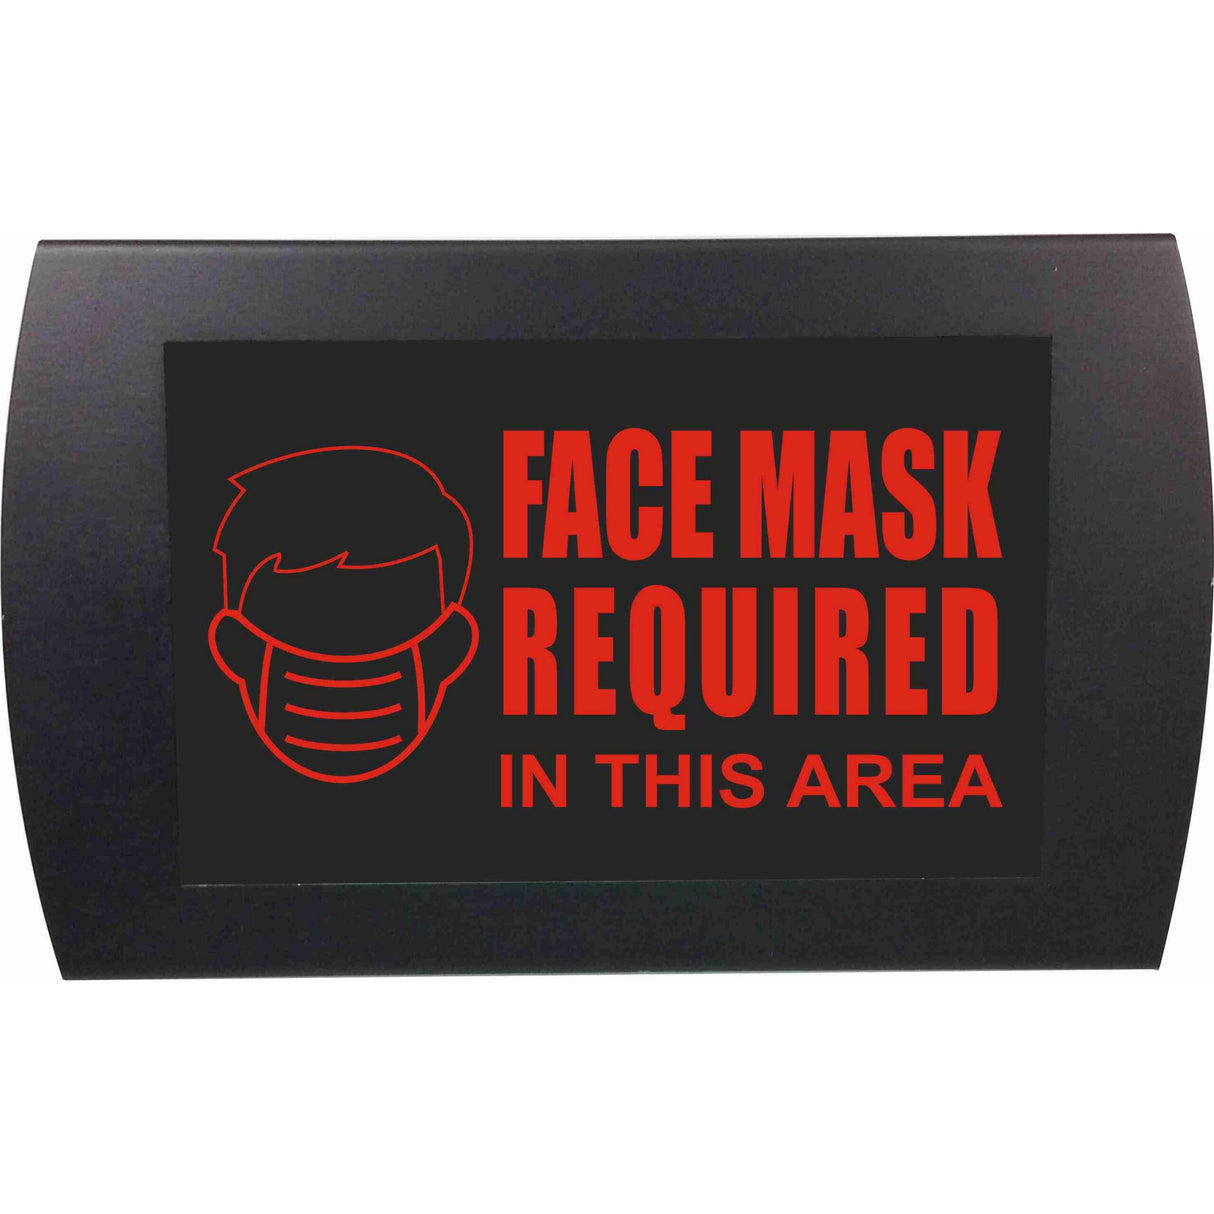 American Recorder Technologies OAS-2048M-RD "FACE MASK REQUIRED IN THIS AREA" Wall Mount LED Lighted Sign, Red